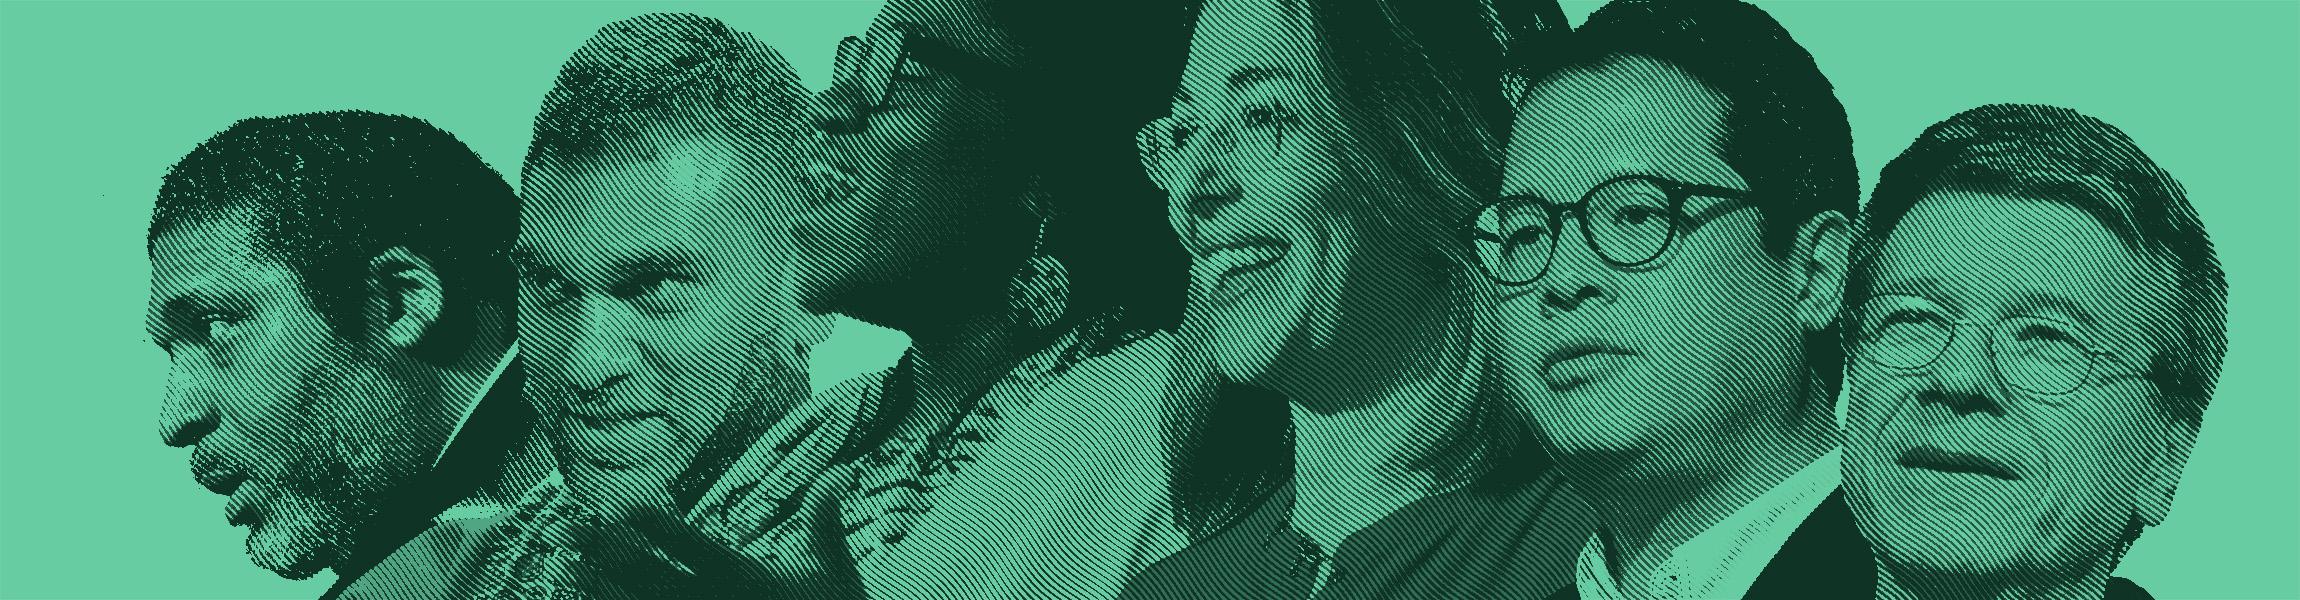 A green-tinted collage of six headshots of speakers across age, race, and gender